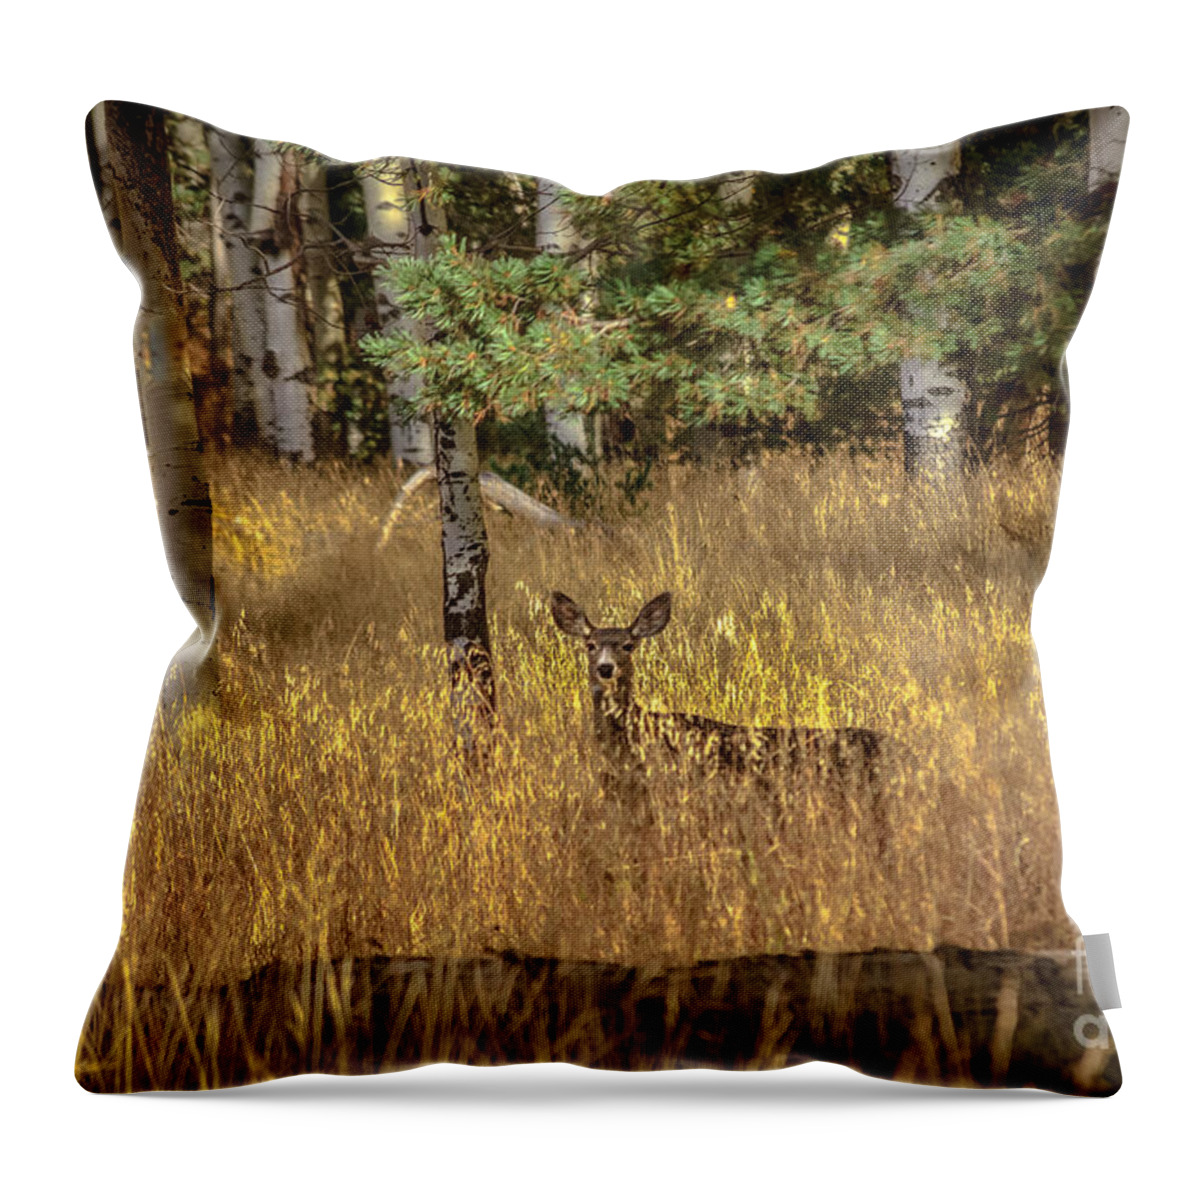 Animal Nature Throw Pillow featuring the photograph Mule Deer In The Aspens by Robert Bales